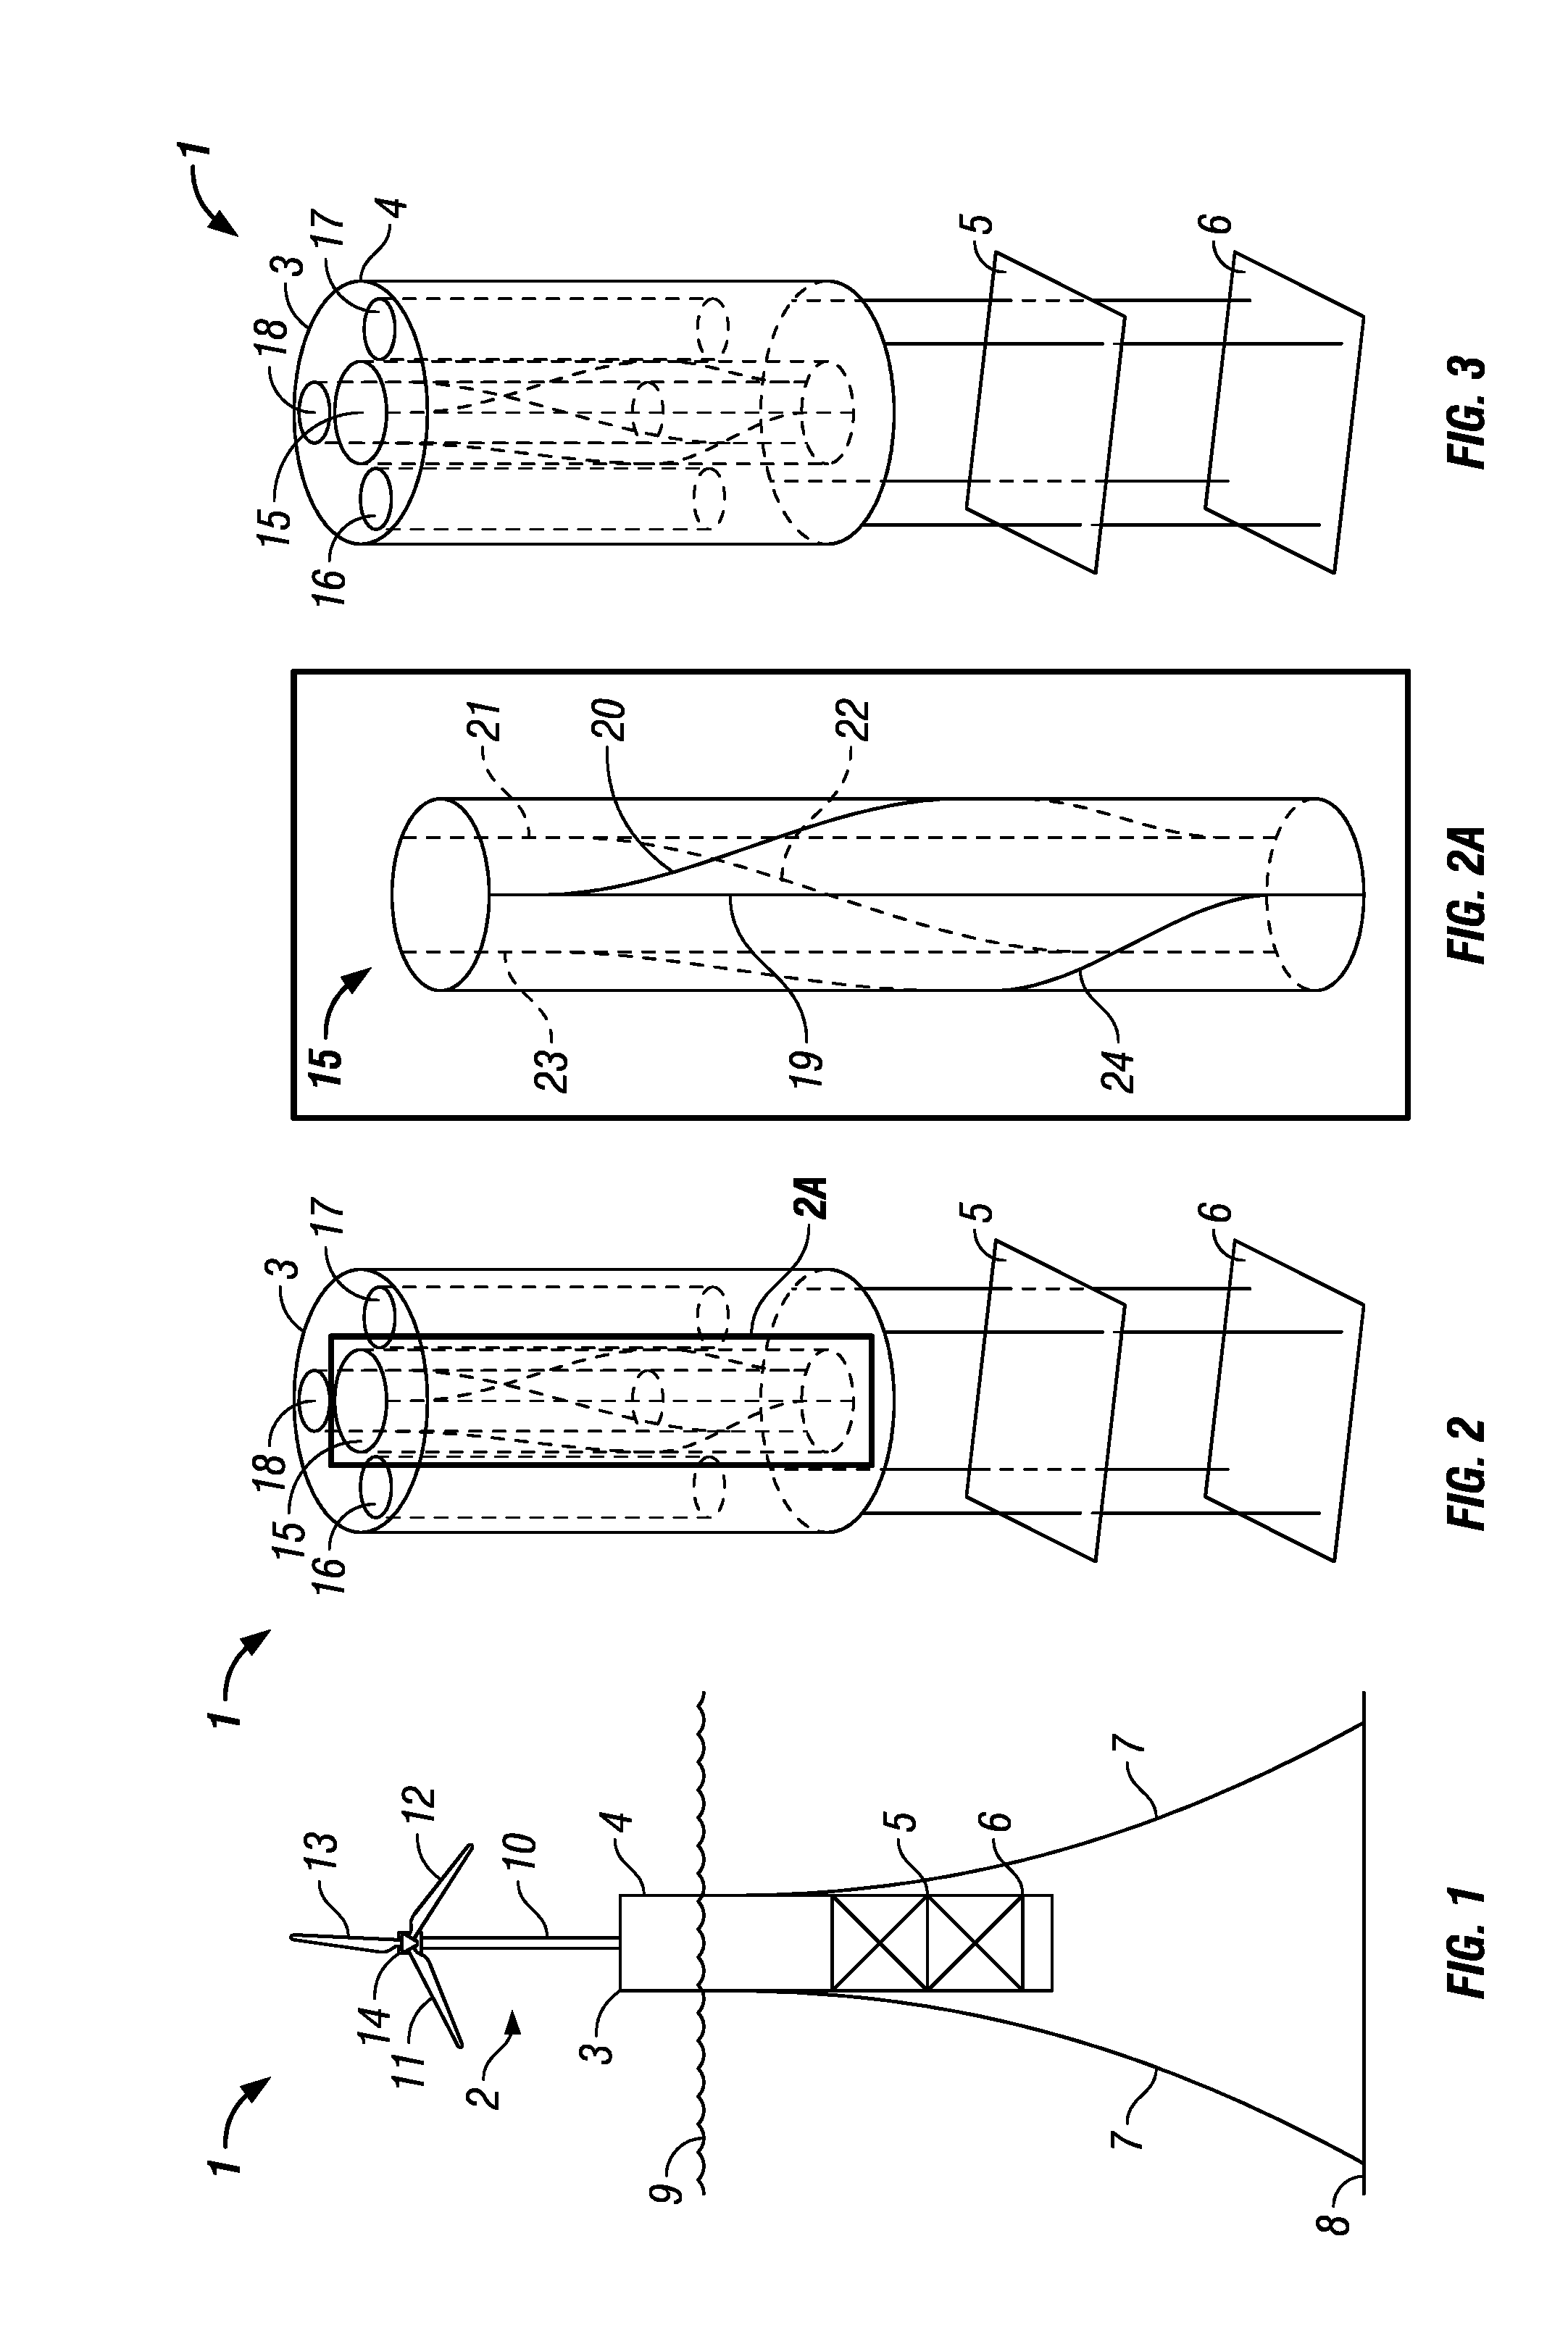 Offshore wind turbine installation system and method